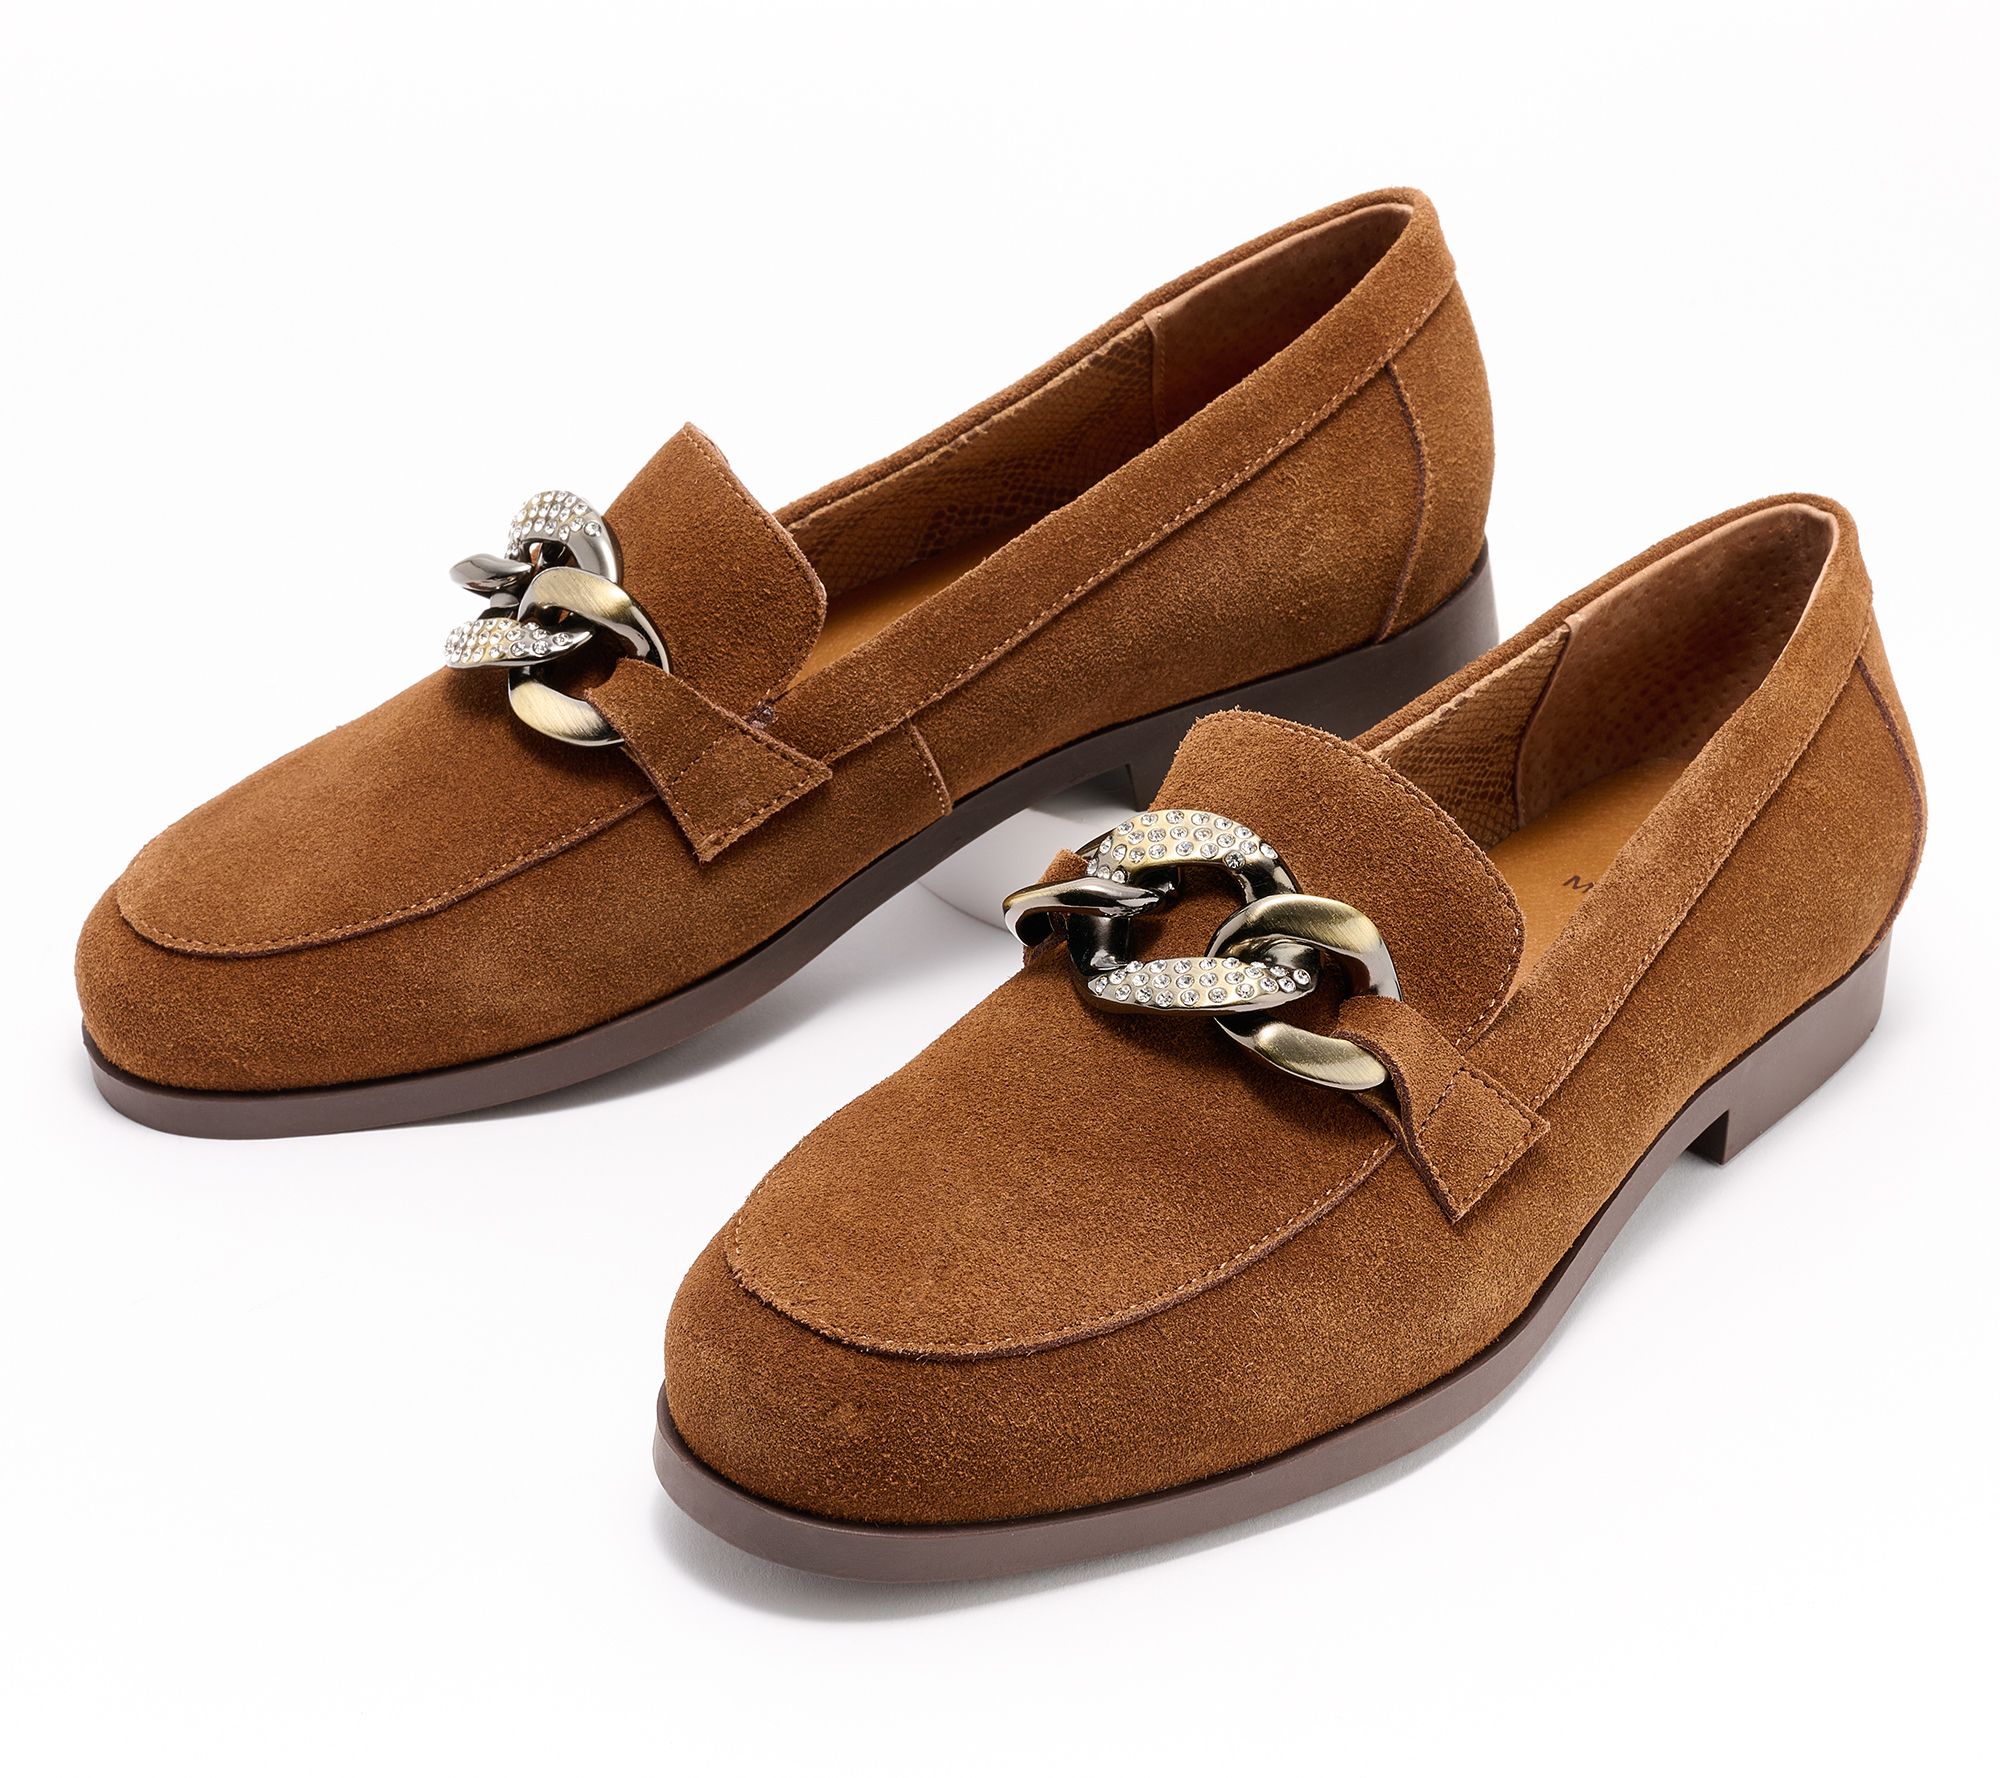 Tag fat farvestof Indskrive White Mountain Suede Slip-On Loafer- Casavas - QVC.com